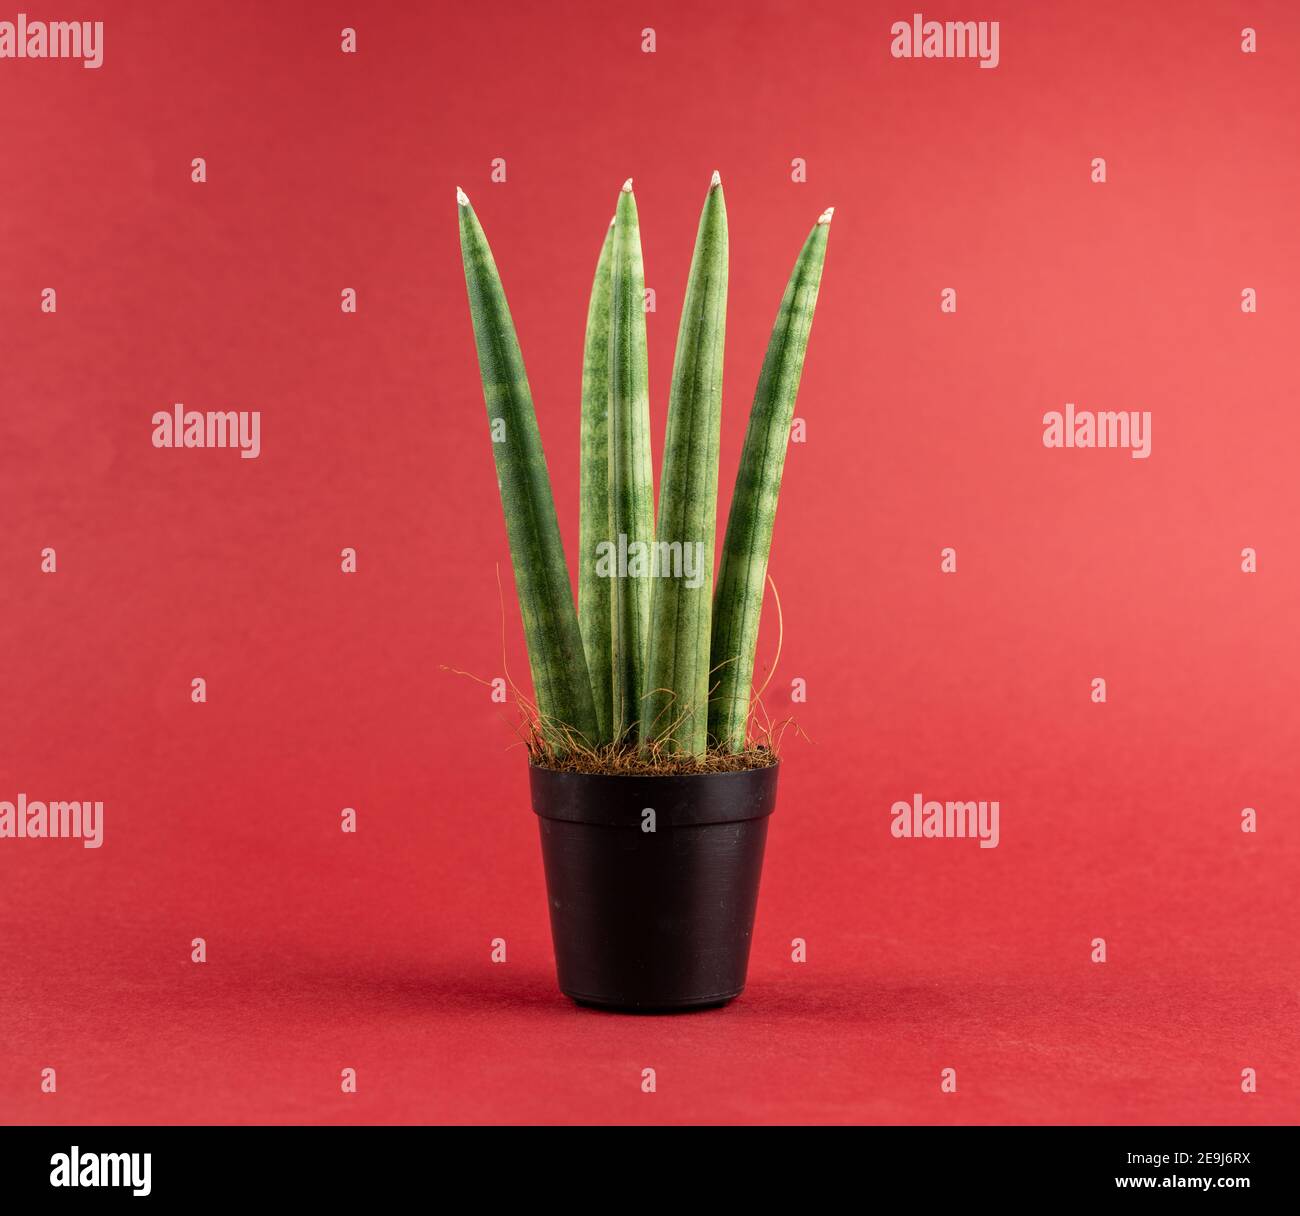 sansevieria cylindrica in pot with red background Stock Photo